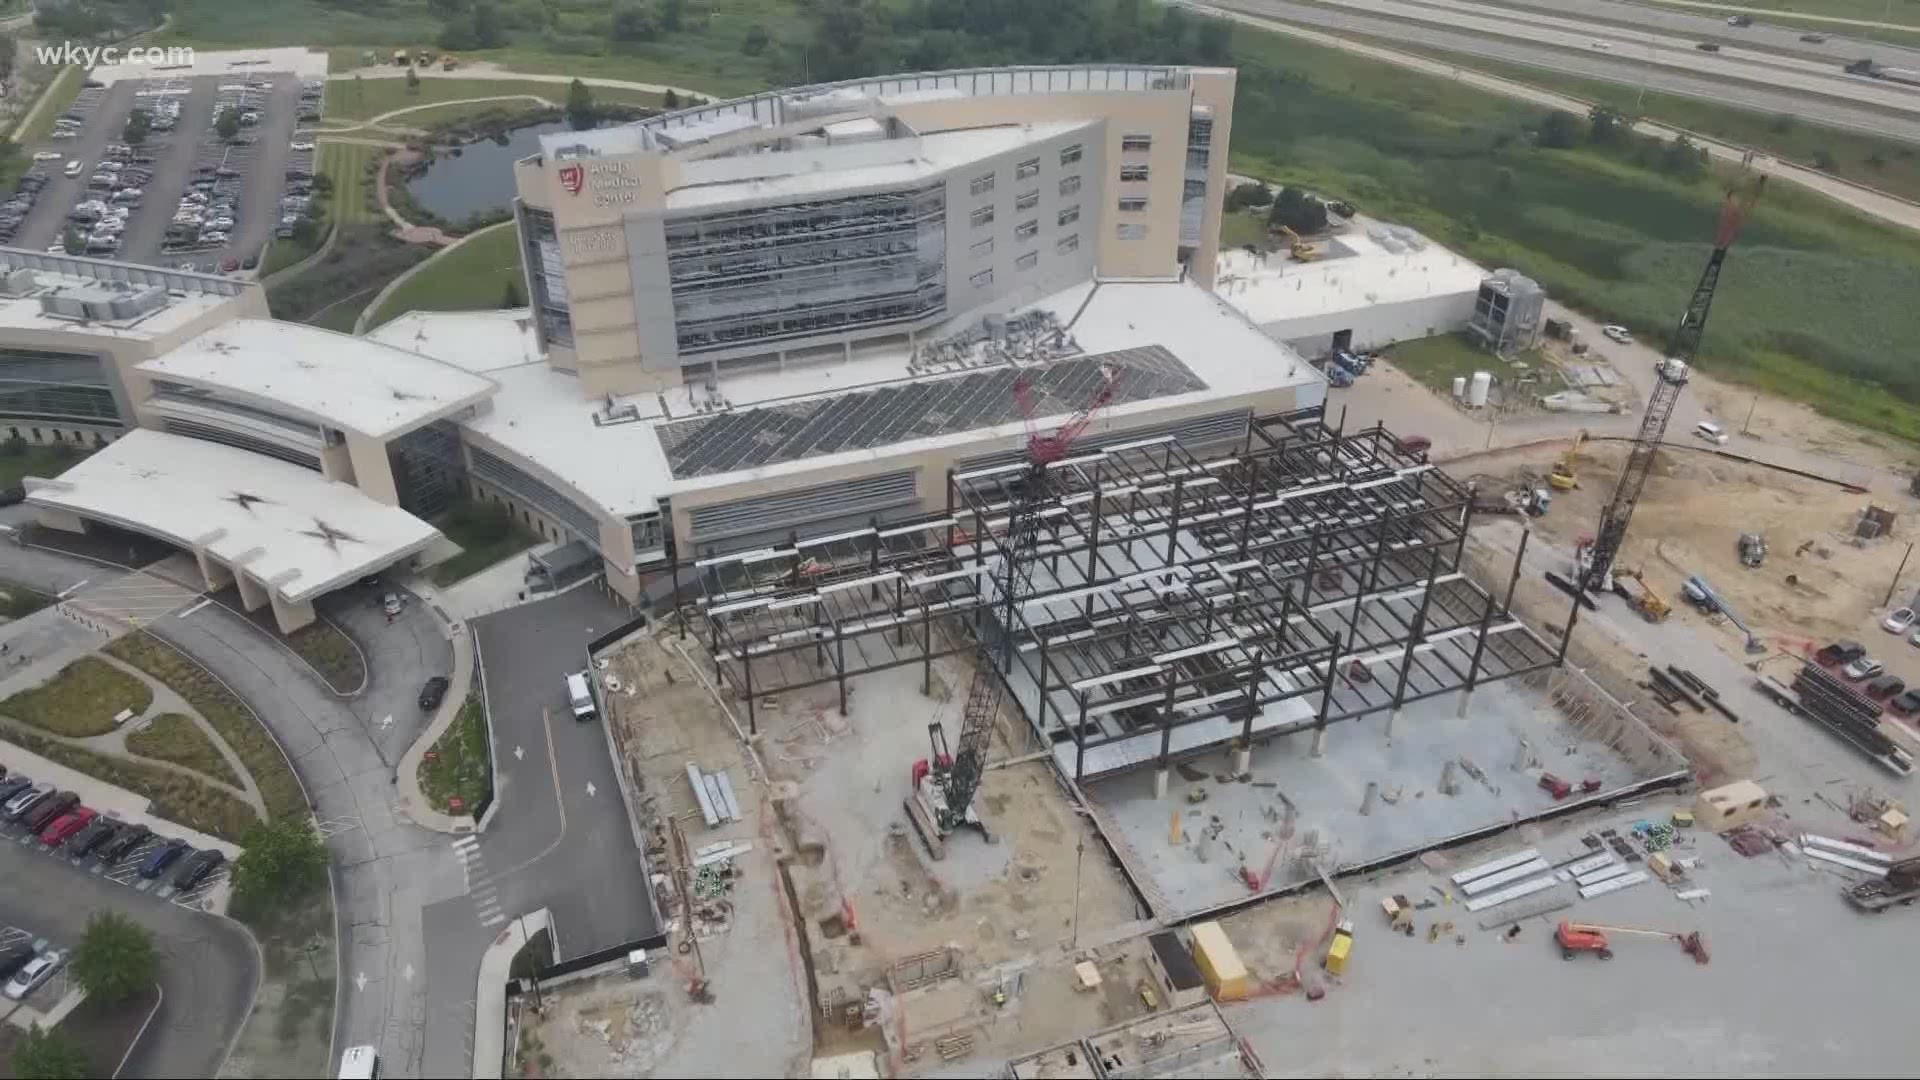 A major expansion project to University Hospitals' Ahuja Medical Center is currently underway.